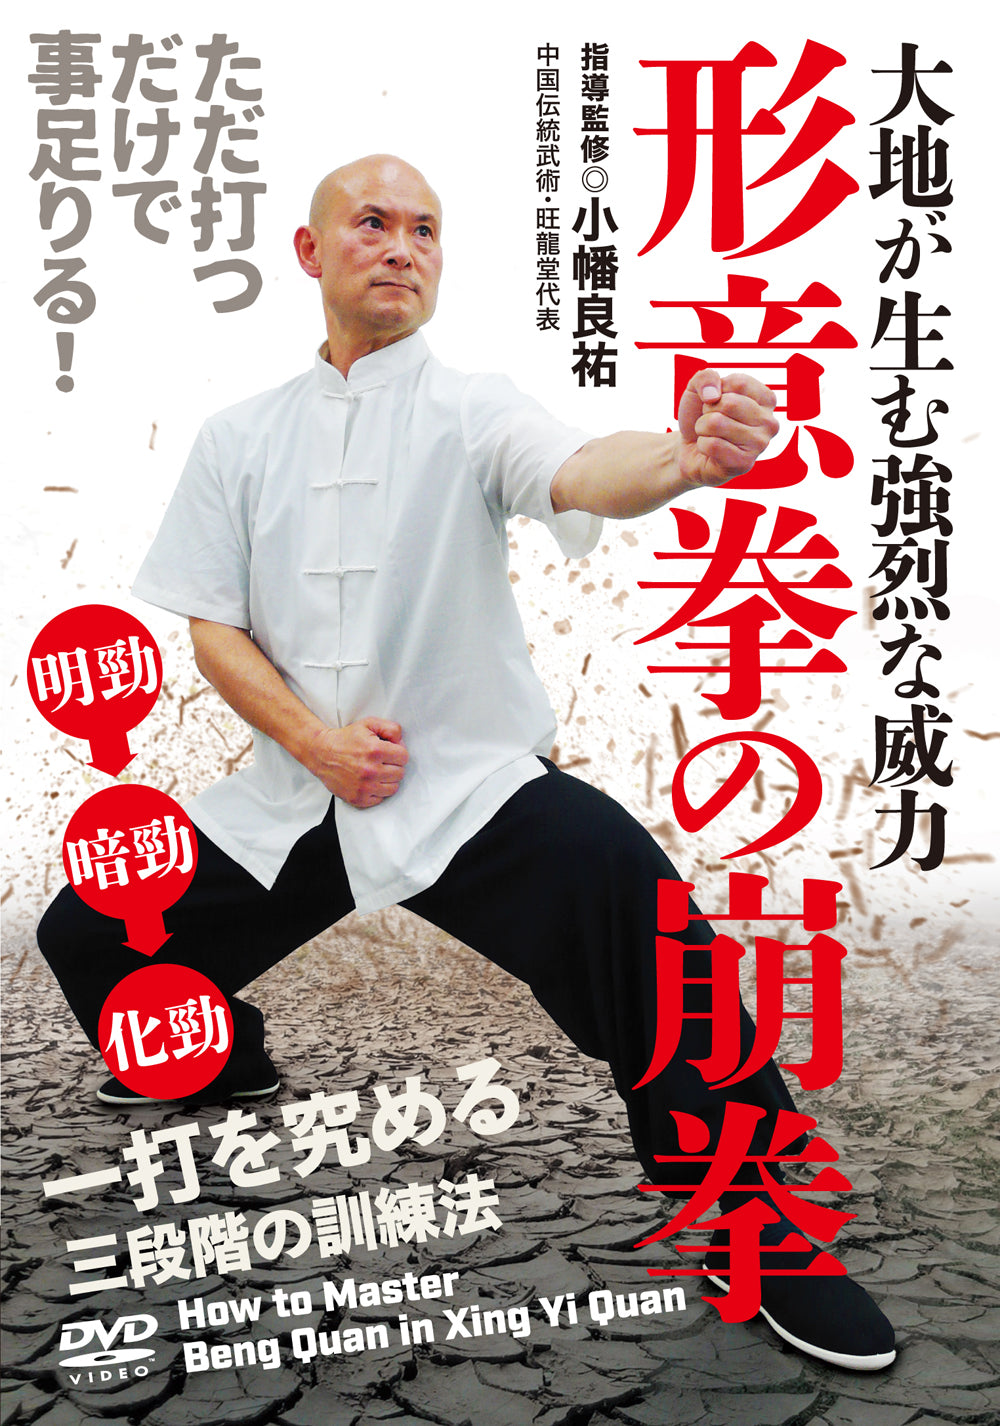 How to Master Beng Quan in Xingyiquan DVD by Ryosuke Obata